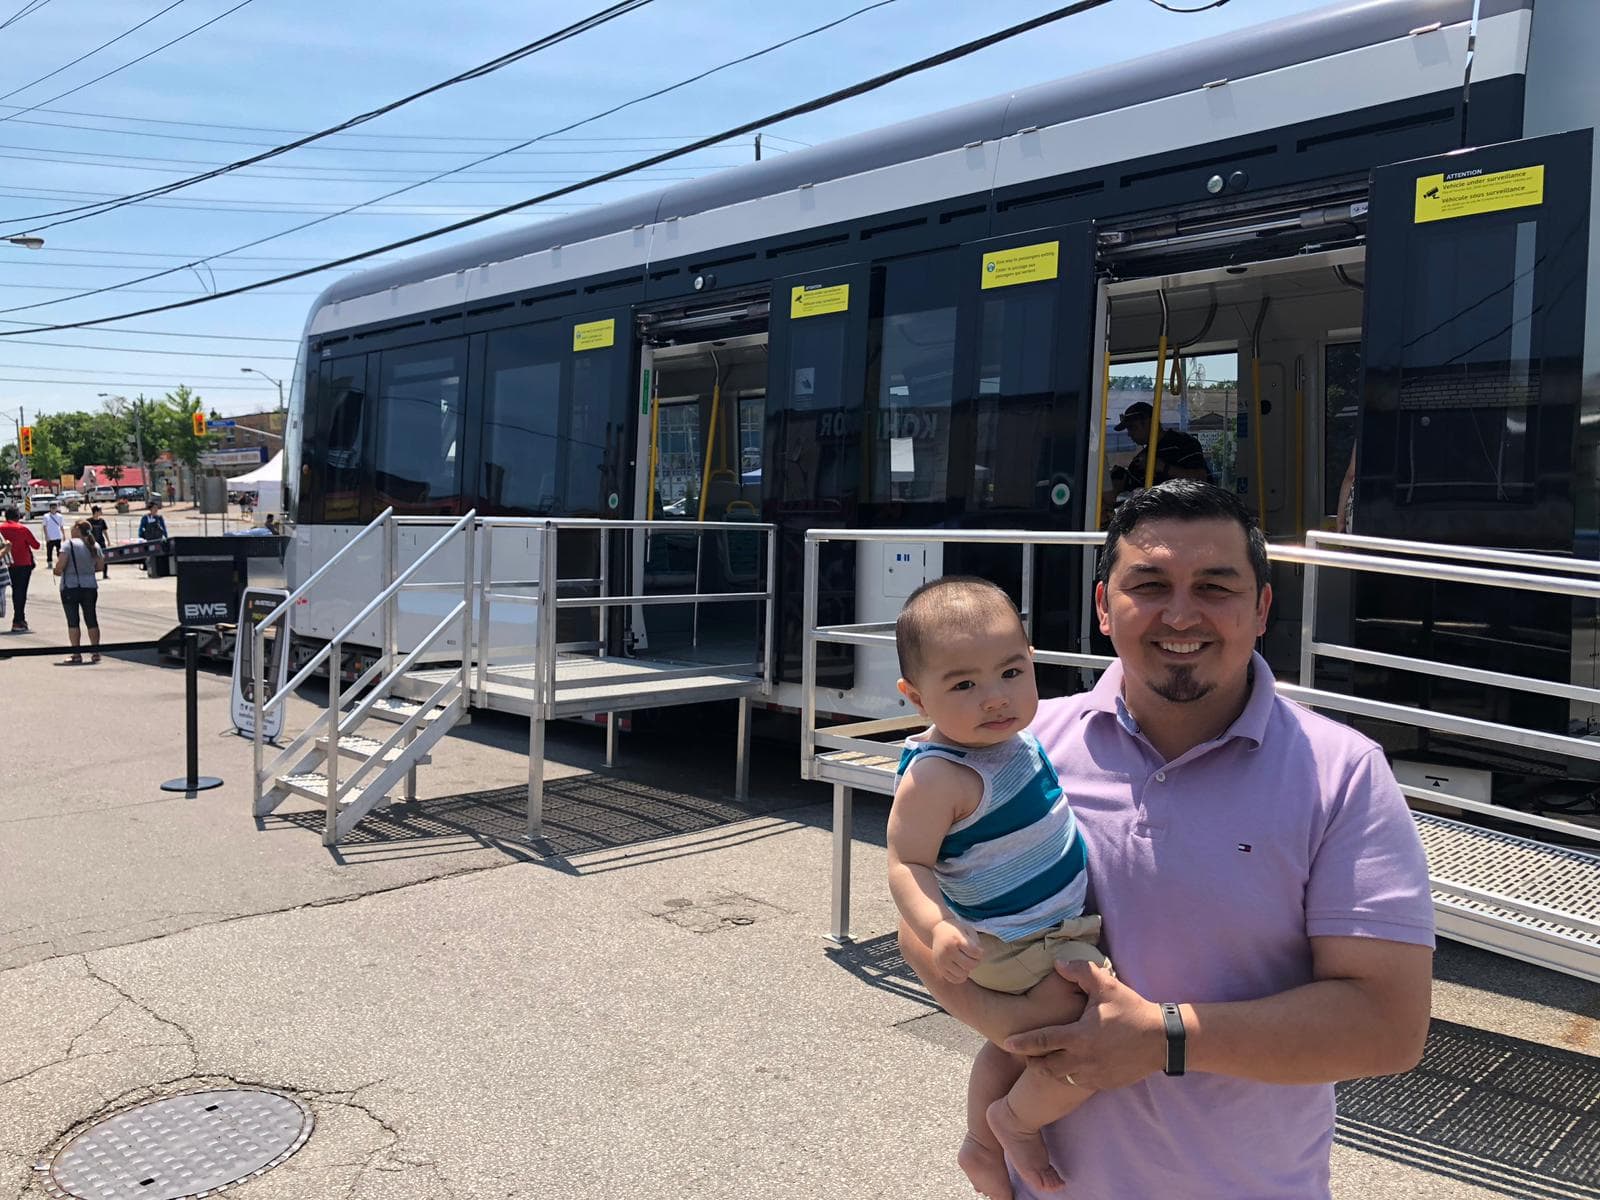 A man holds an infant while next to an LRV mock-up.